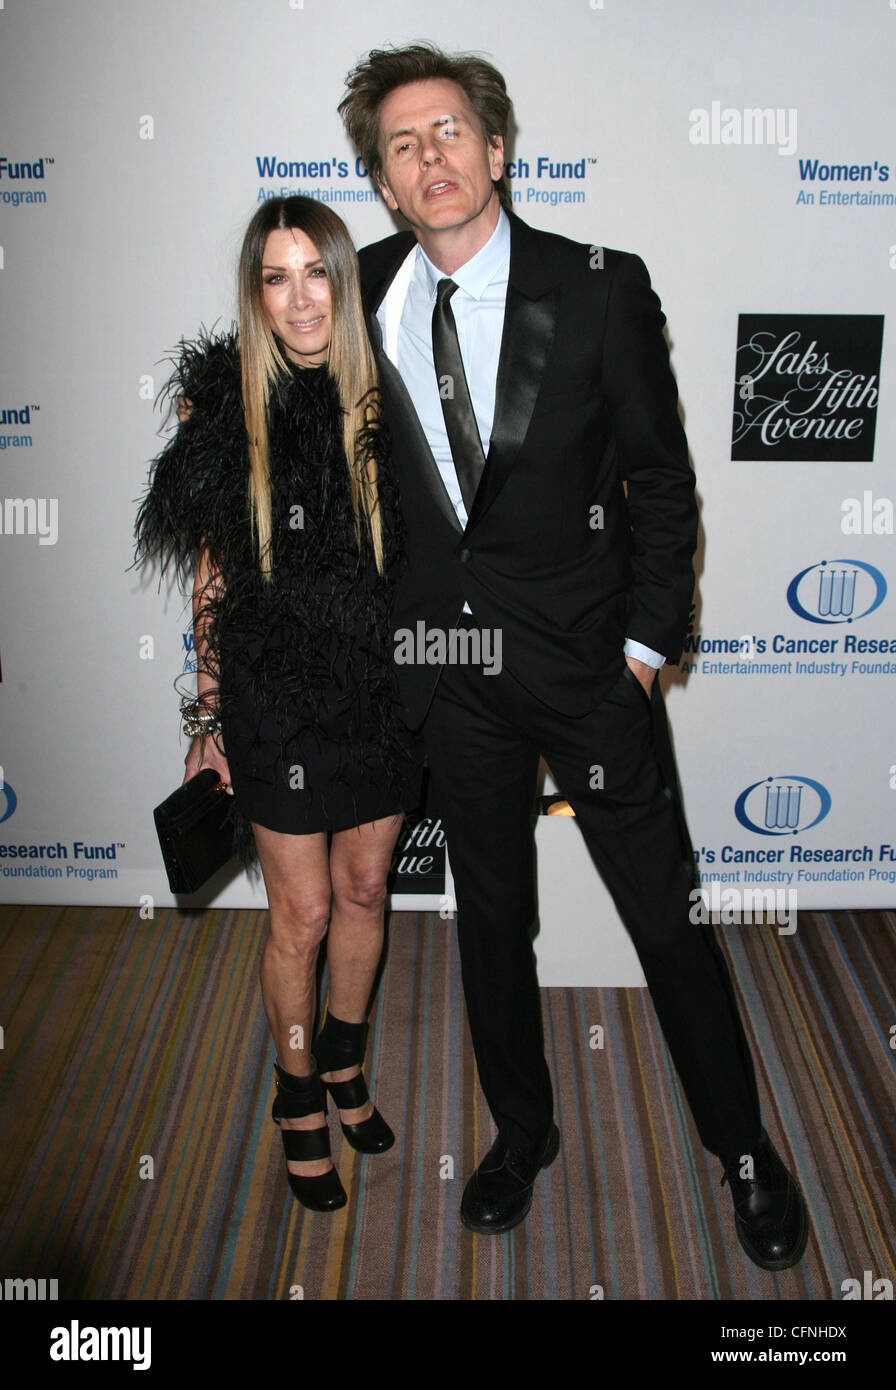 John Taylor and Gela Nash 14th Annual Unforgettable Evening Bevefitting EIF's Women's Cancer Research Fund held at the Beverly Wilshire Four Seasons Hotel Beverly Hills, California - 10.02.11 Stock Photo